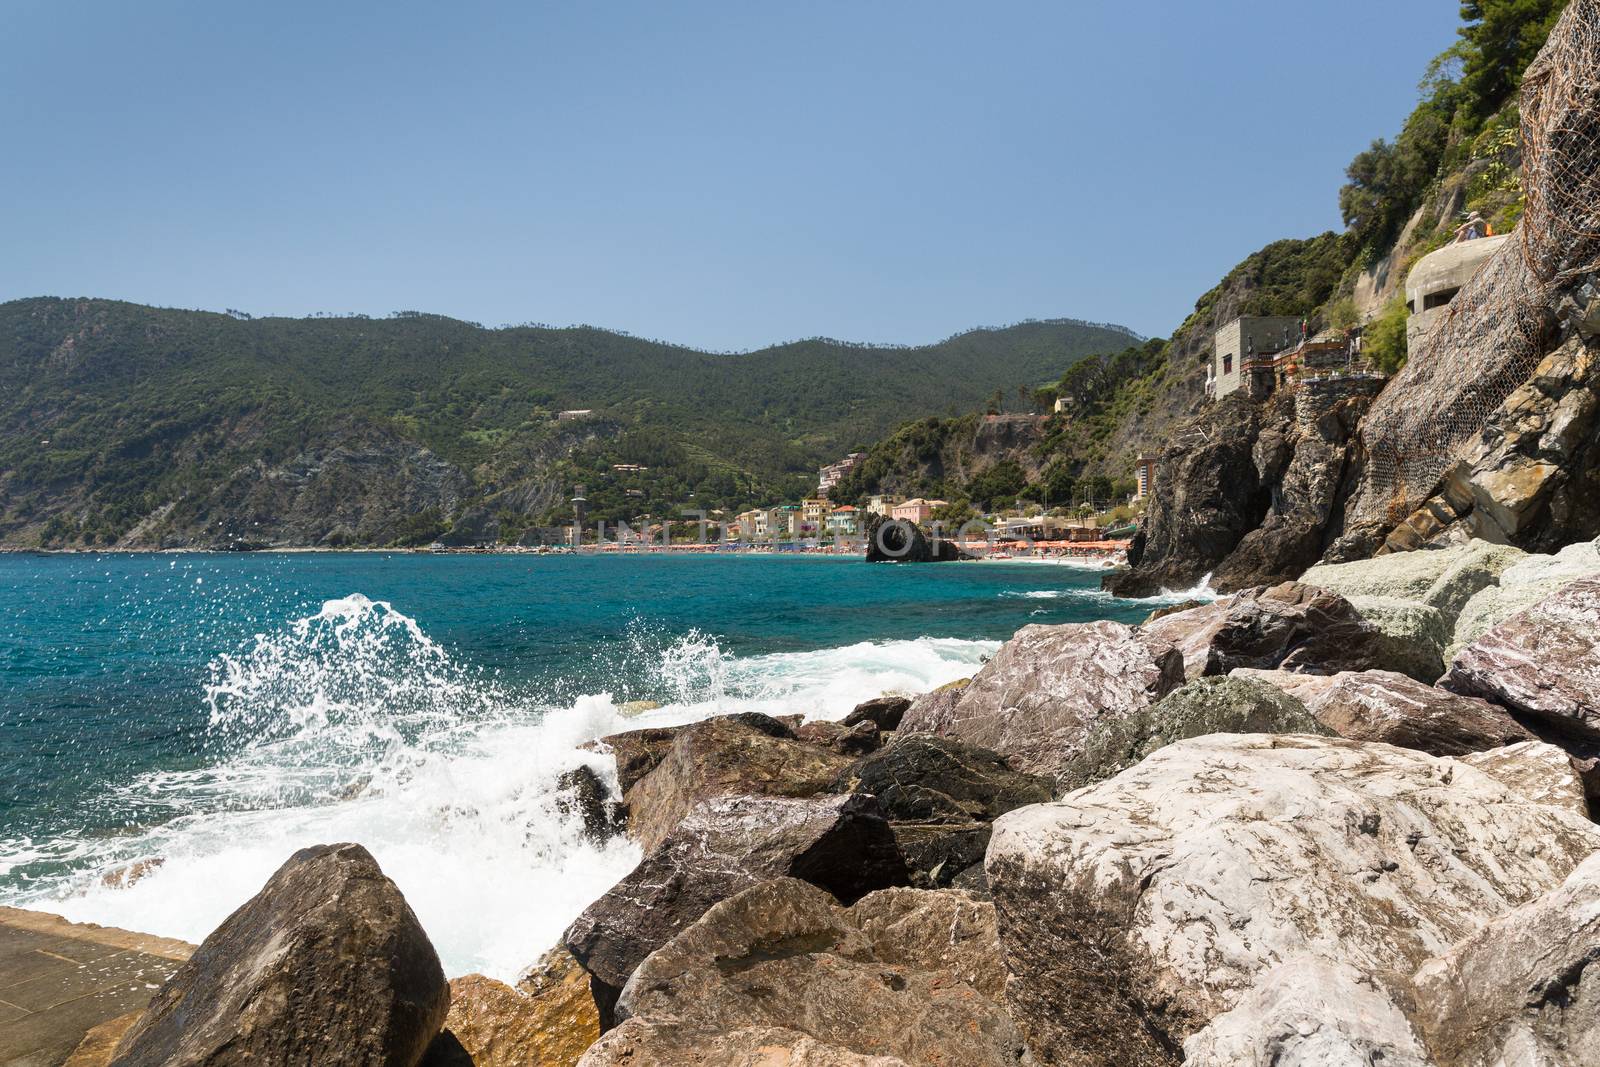 The town of Monterosso of the Cinque Terre, on the Italian Riviera in the Liguria region of Italy